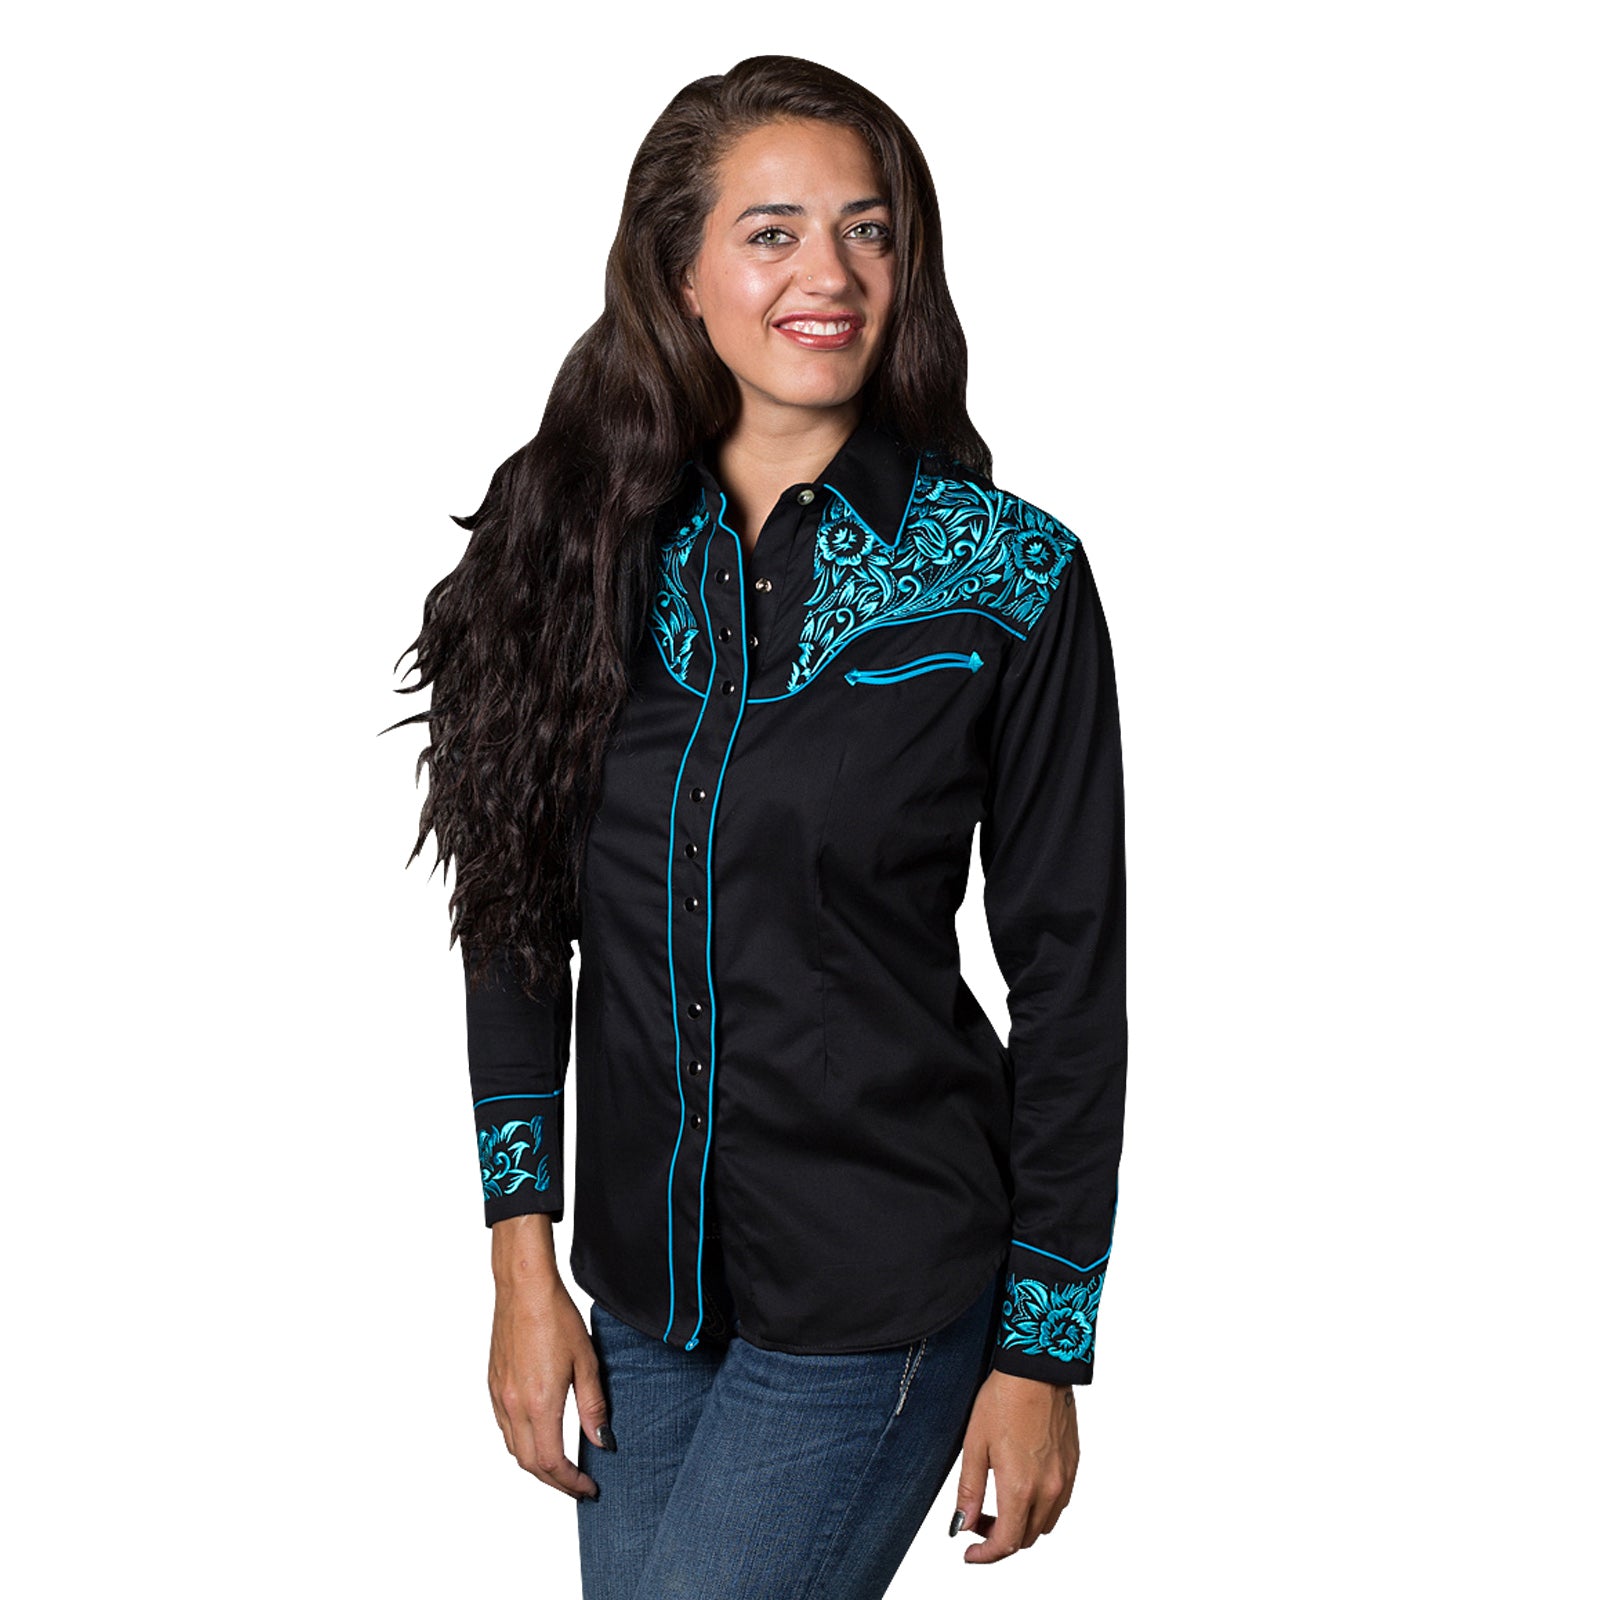 Rockmount Women's Vintage Tooling Embroidery Black & Turquoise Shirt